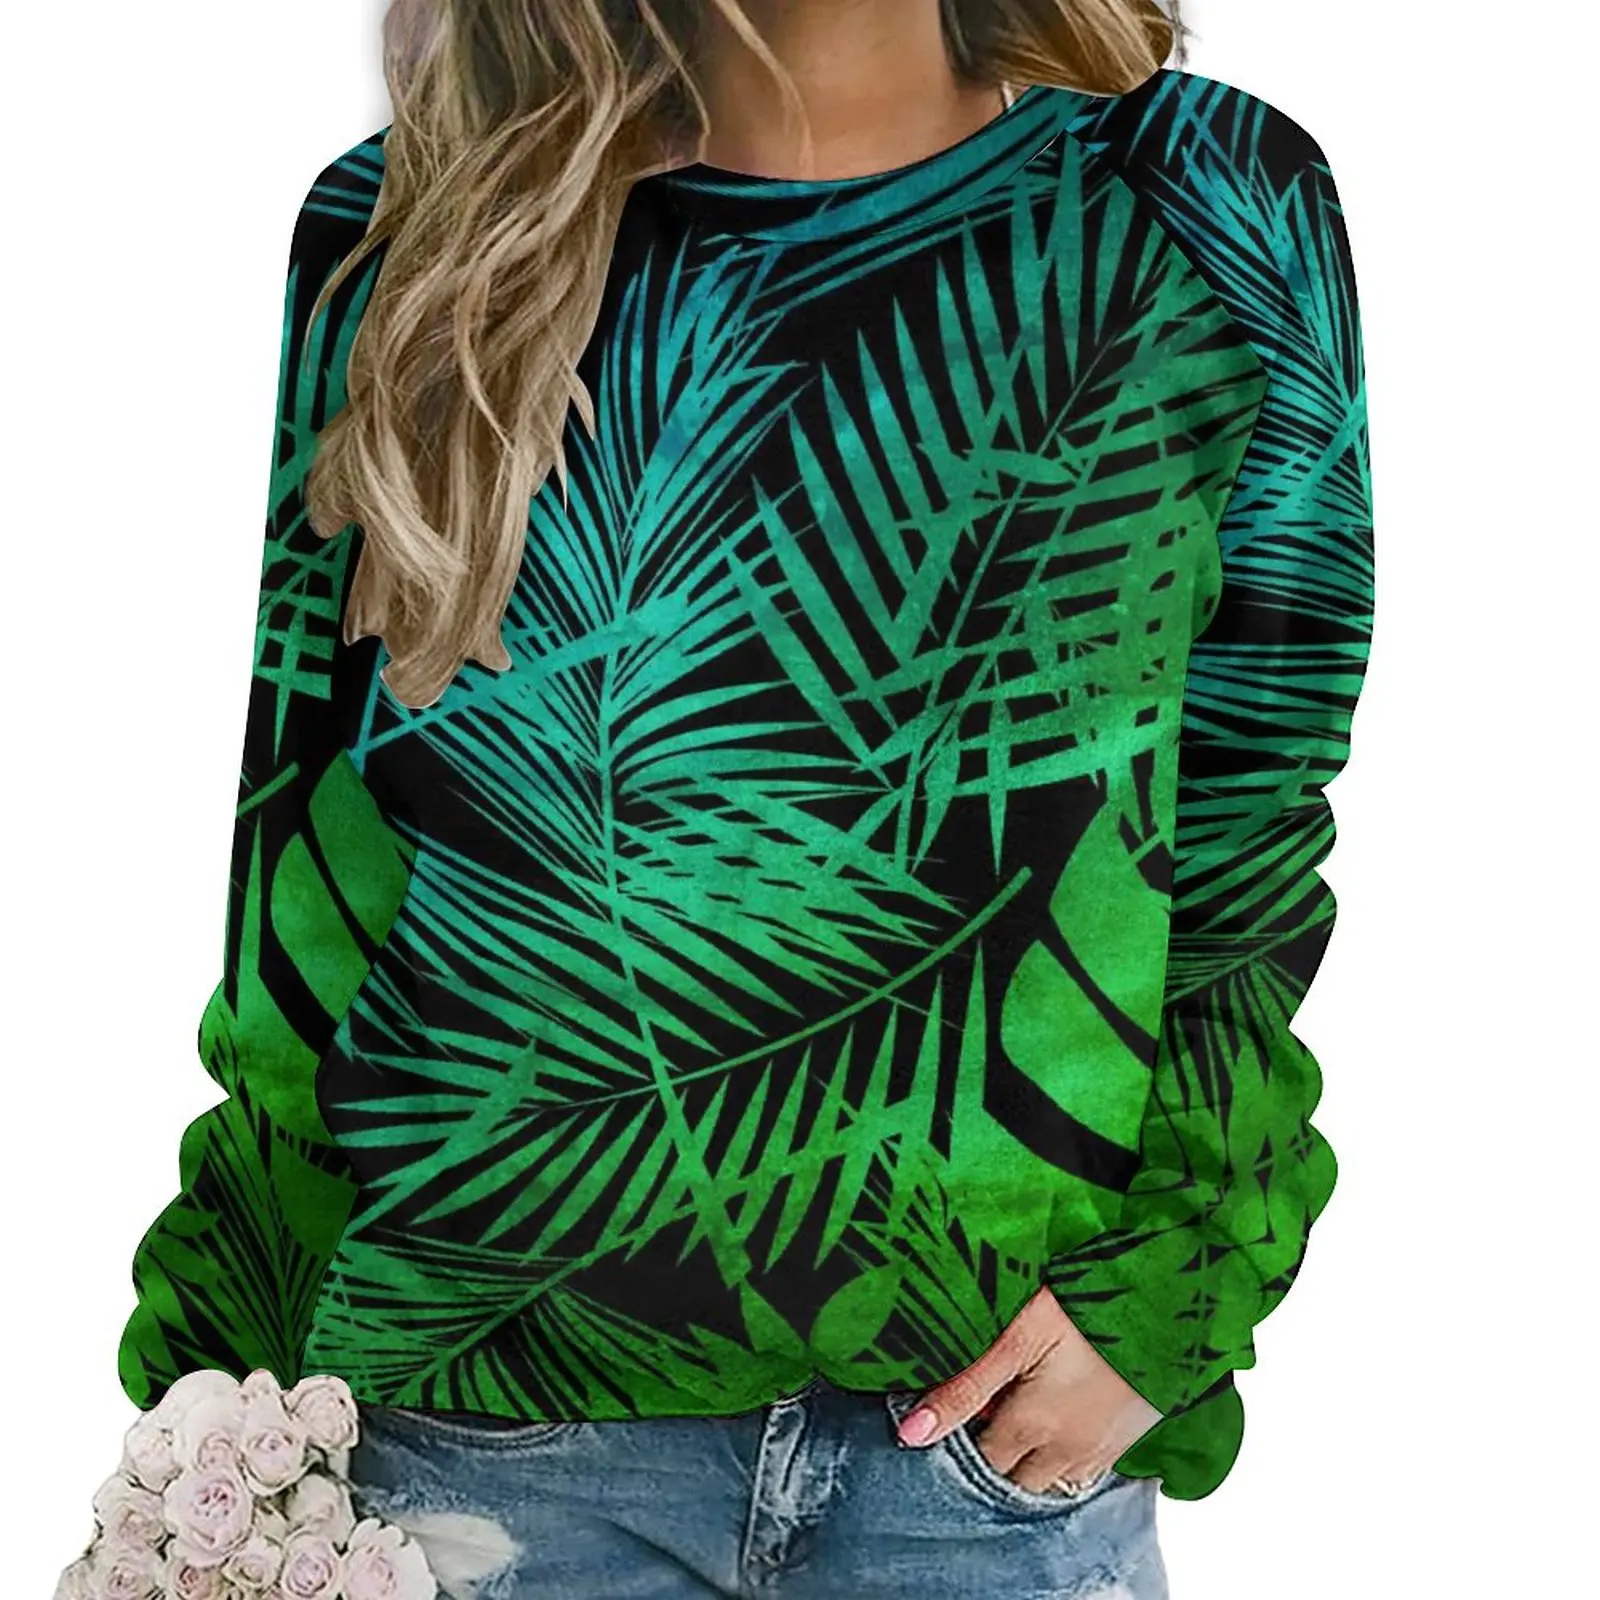 

Palm Leaf Print Hoodies Female Long Sleeve Green Ombre Tropical Cool Casual Hoodie Hot Sale Autumn Classic Oversize Sweatshirts